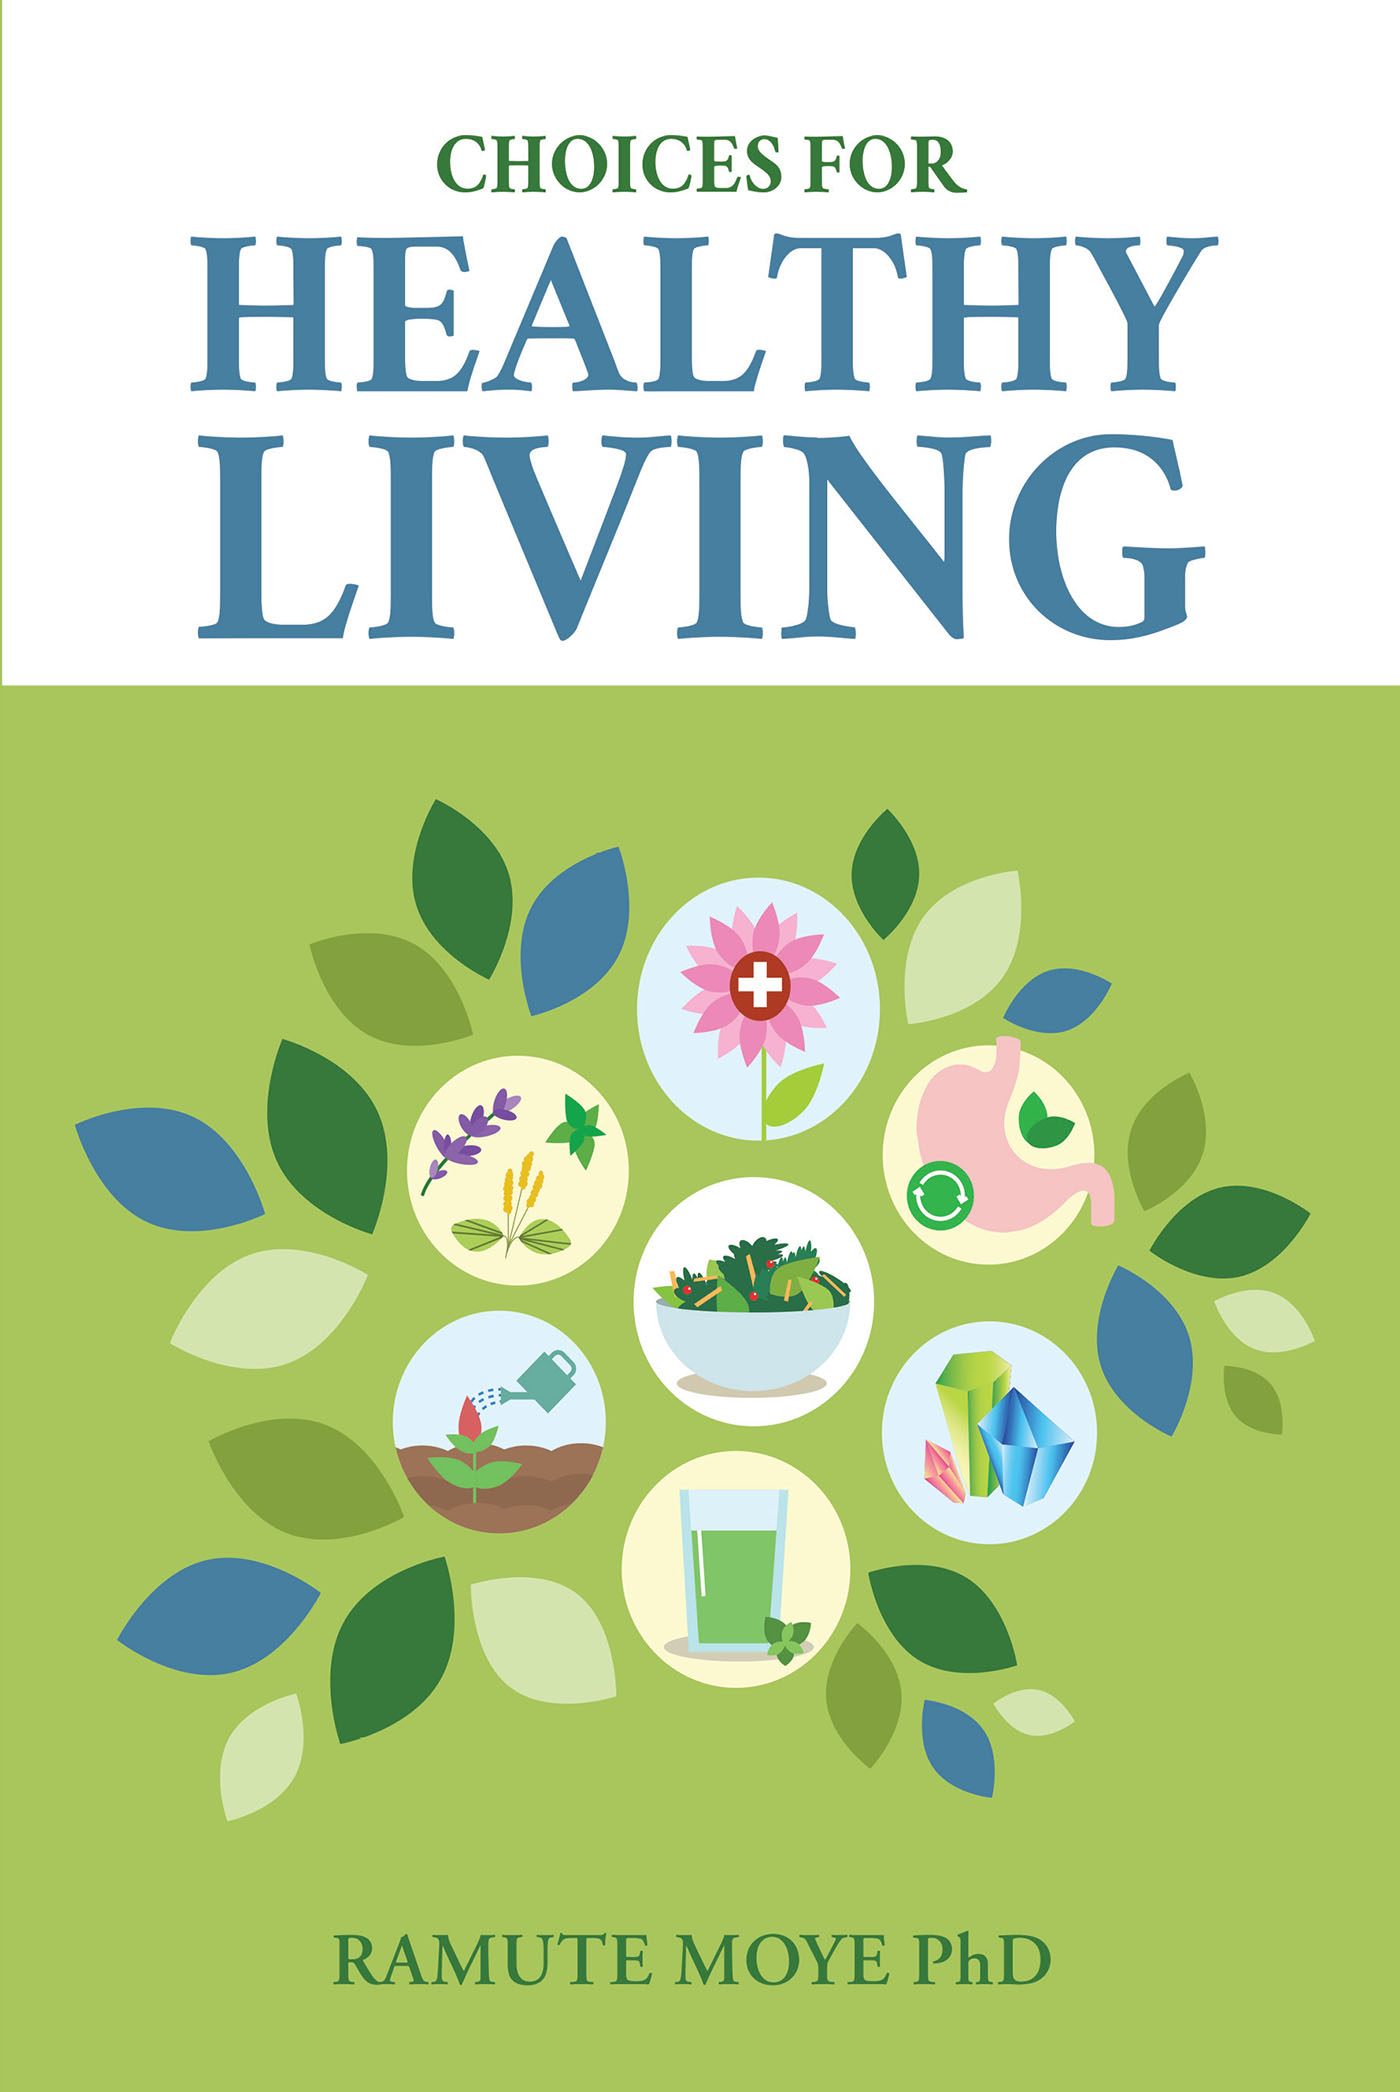 Ramute Moye Phd’s Newly Released “Choices For Healthy Living” is an Informative Study of the Significant Impact Foods and Lifestyle Choices Have on Our Overall Health